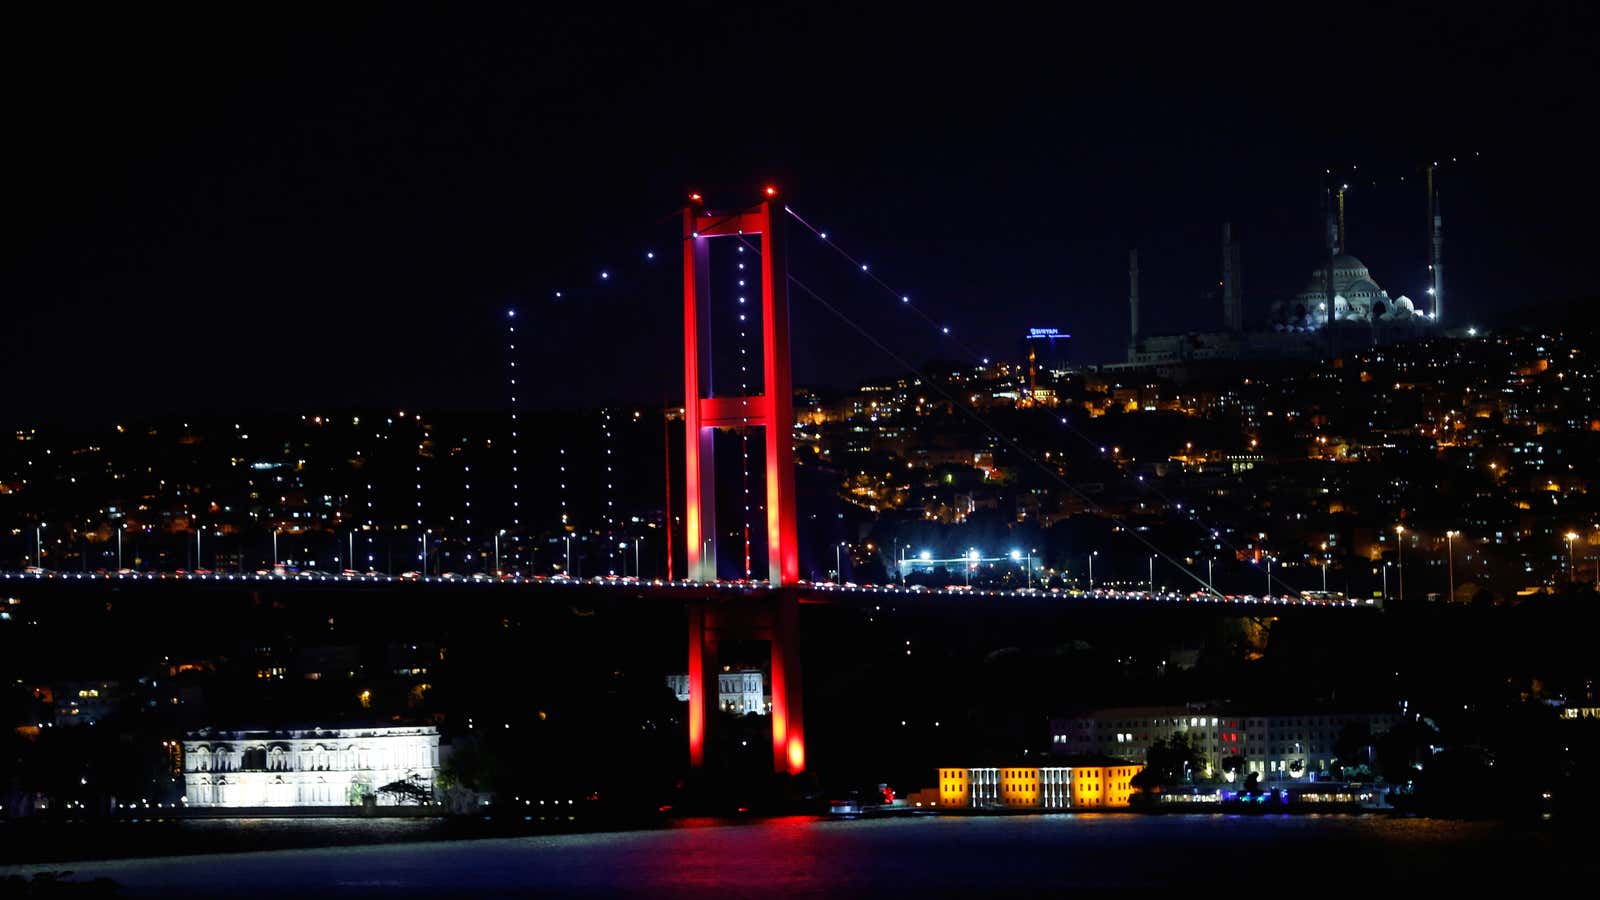 The Bosphorus bridge was closed by Turkish military for traffic coming from Asia to Europe.